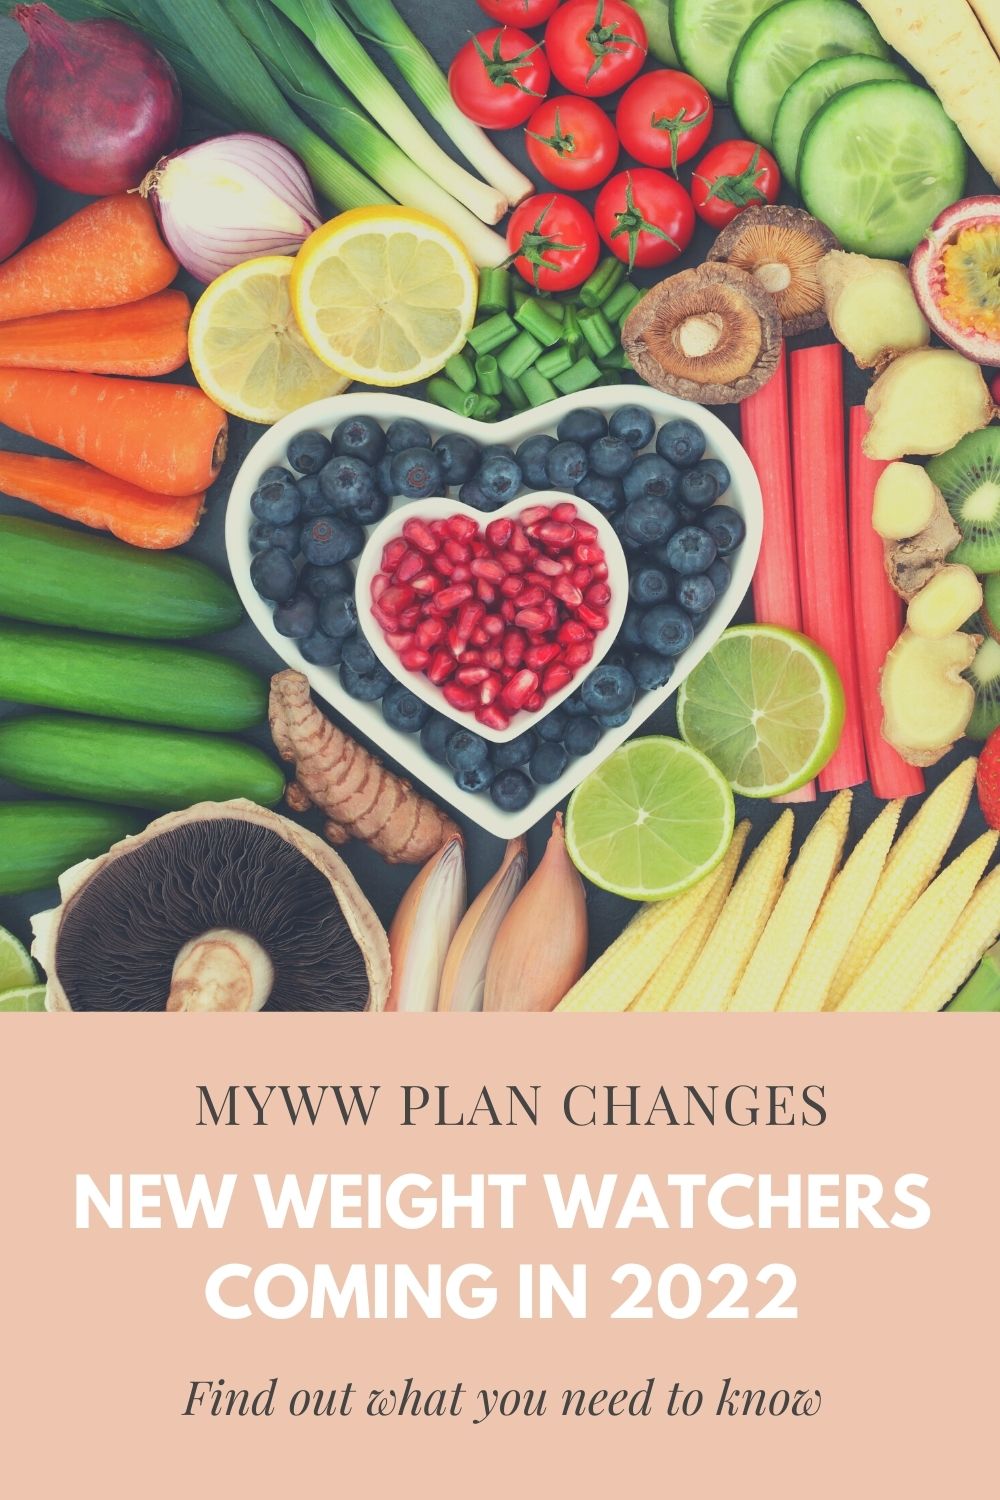 Weight Watchers Changes Name to WW: What's Changing About the Program